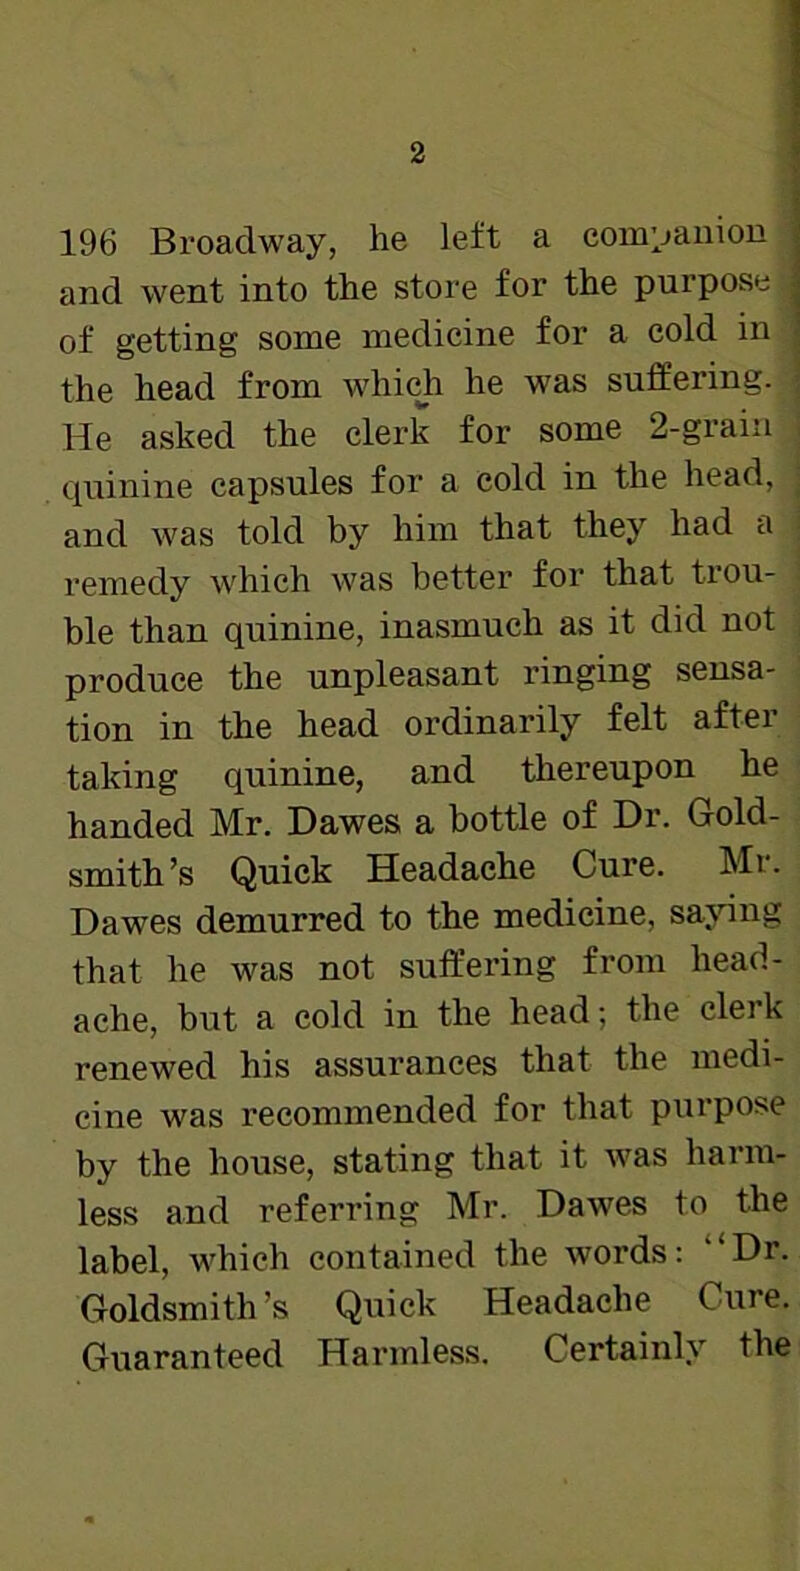 196 Broadway, he left a companion and went into the store for the purpose of getting some medicine for a cold in the head from which he was suffering, j He asked the clerk for some 2-grain i quinine capsules for a cold in the head, ; and was told by him that they had a - remedy which was better for that trou- ble than quinine, inasmuch as it did not produce the unpleasant ringing sensa- tion in the head ordinarily felt after taking quinine, and thereupon he handed Mr. Dawes a bottle of Dr. Gold- smith’s Quick Headache Cure. Mr. Dawes demurred to the medicine, saying that he was not suffering from head- ache, but a cold in the head; the clerk renewed his assurances that the medi- cine was recommended for that purpose by the house, stating that it was harm- less and referring Mr. Dawes to the label, which contained the words: ‘‘Dr. Goldsmith’s Quick Headache Cure. Guaranteed Harmless. Certainly the